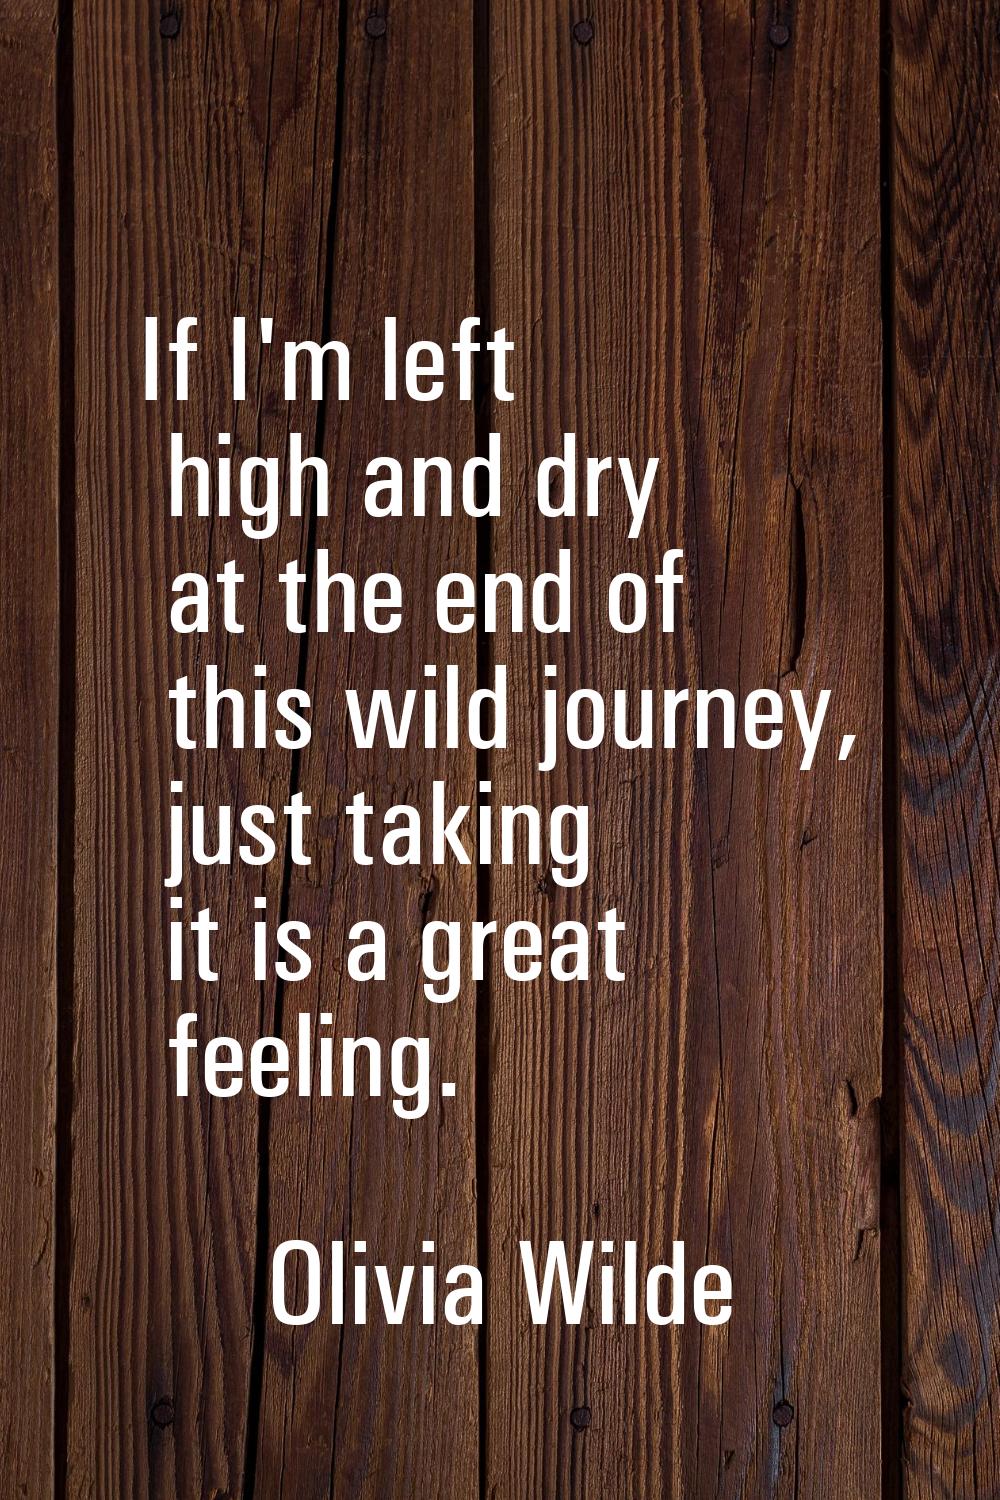 If I'm left high and dry at the end of this wild journey, just taking it is a great feeling.